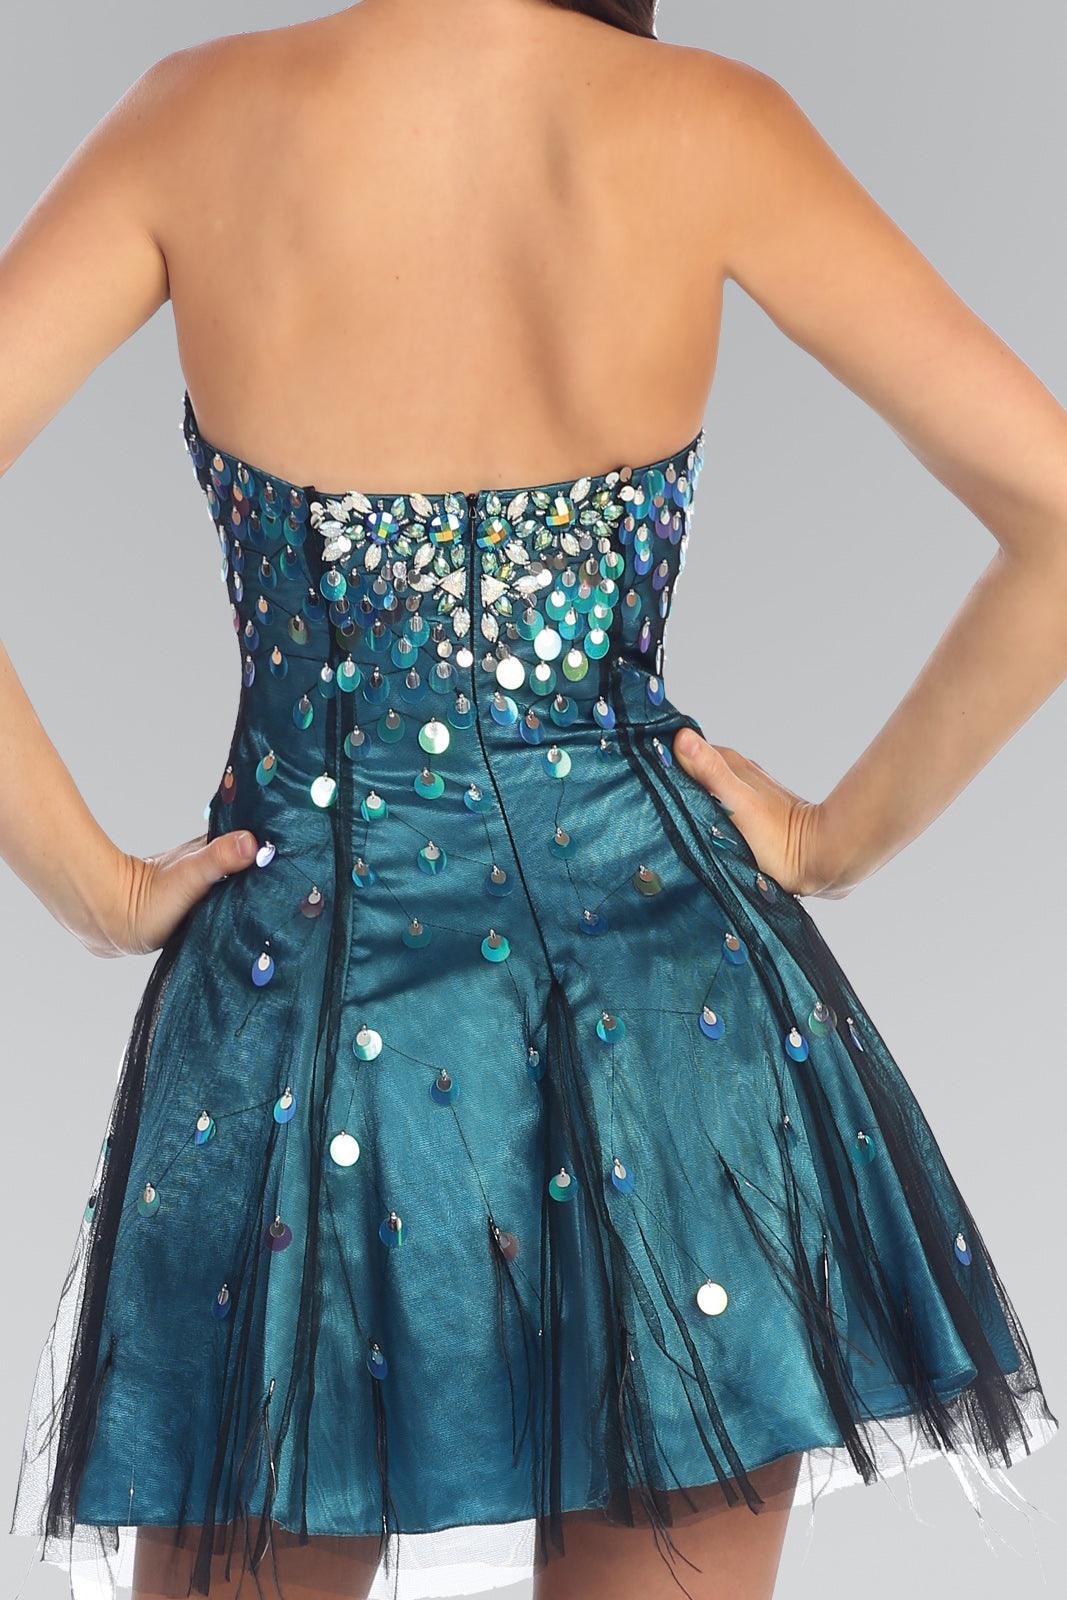 Strapless Sequined Short Prom Dress - The Dress Outlet